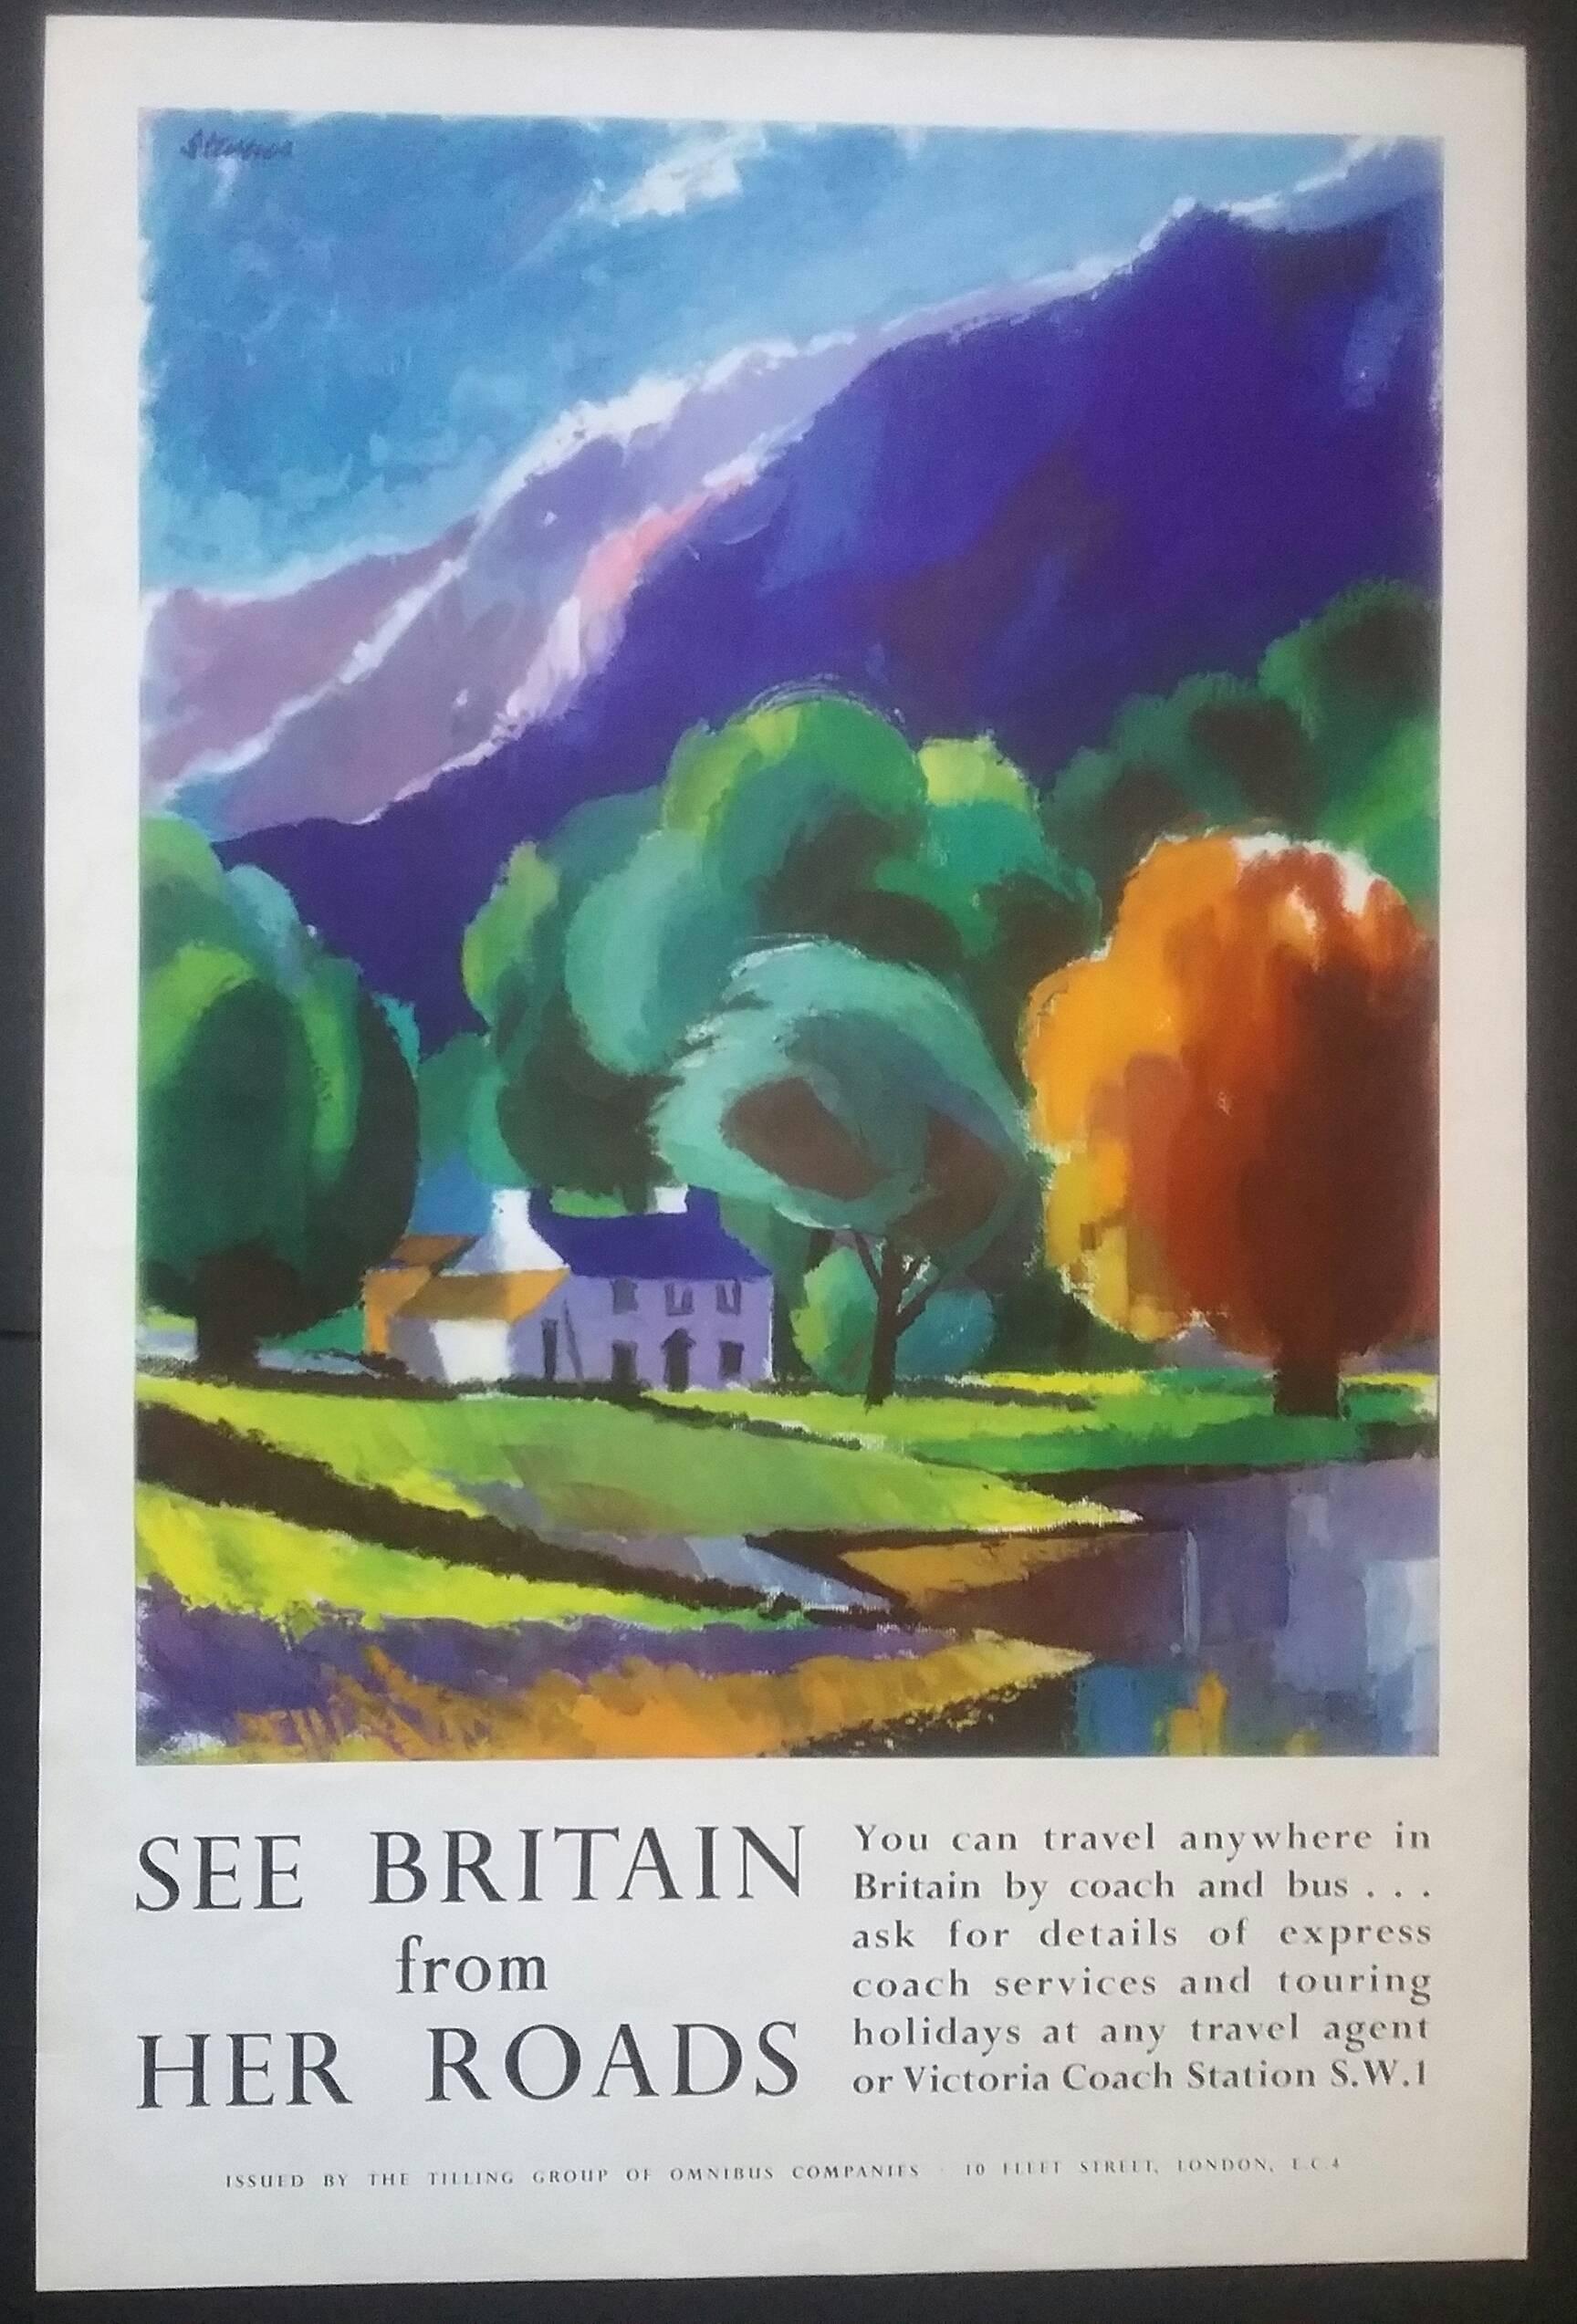 See Britain from Her Roads - Print by Harry Stevens